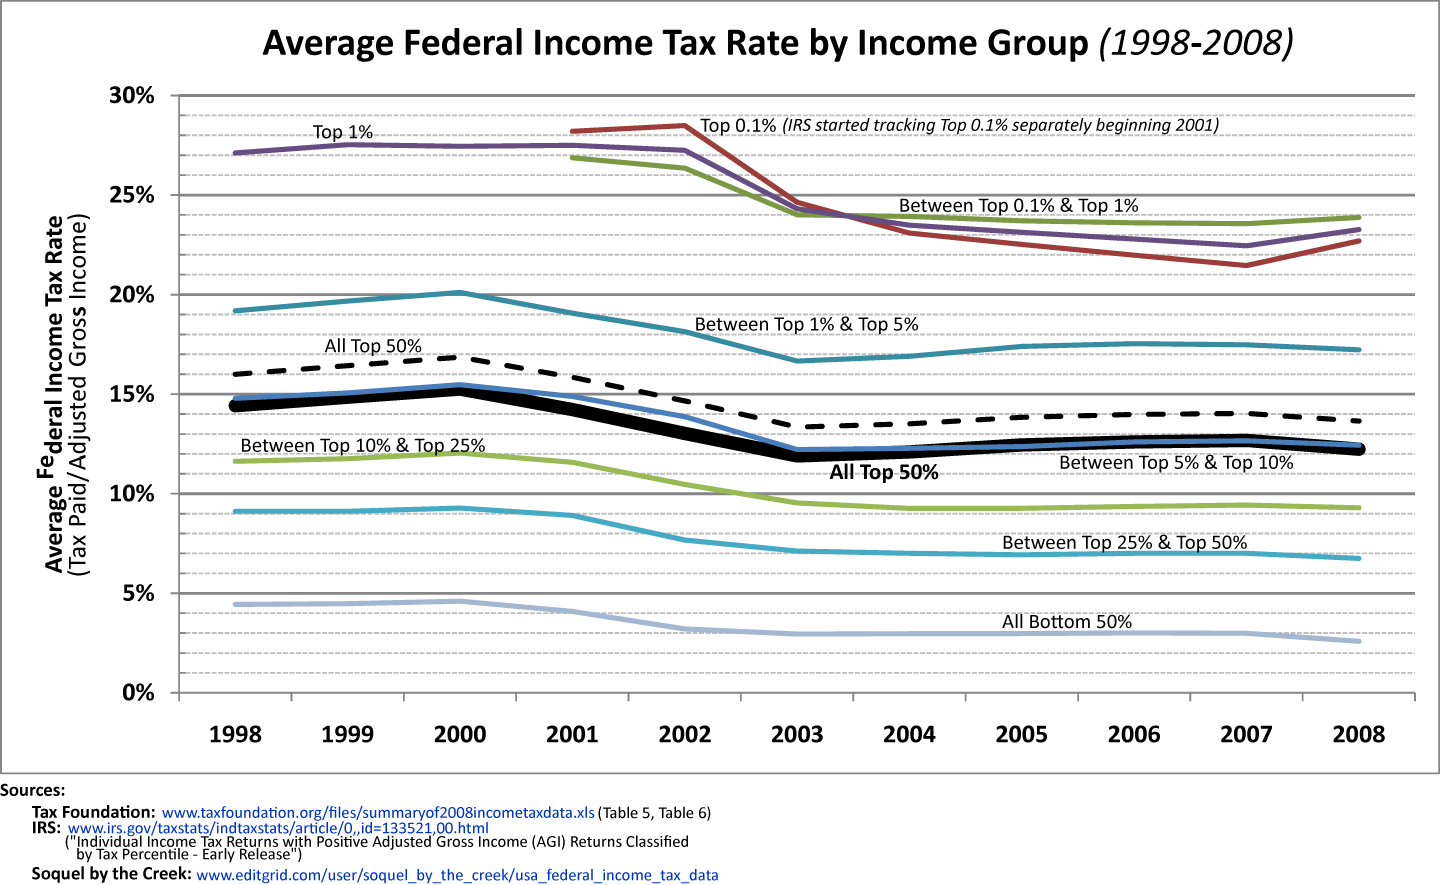 creekside-chat-chart-average-federal-income-tax-rate-by-income-group